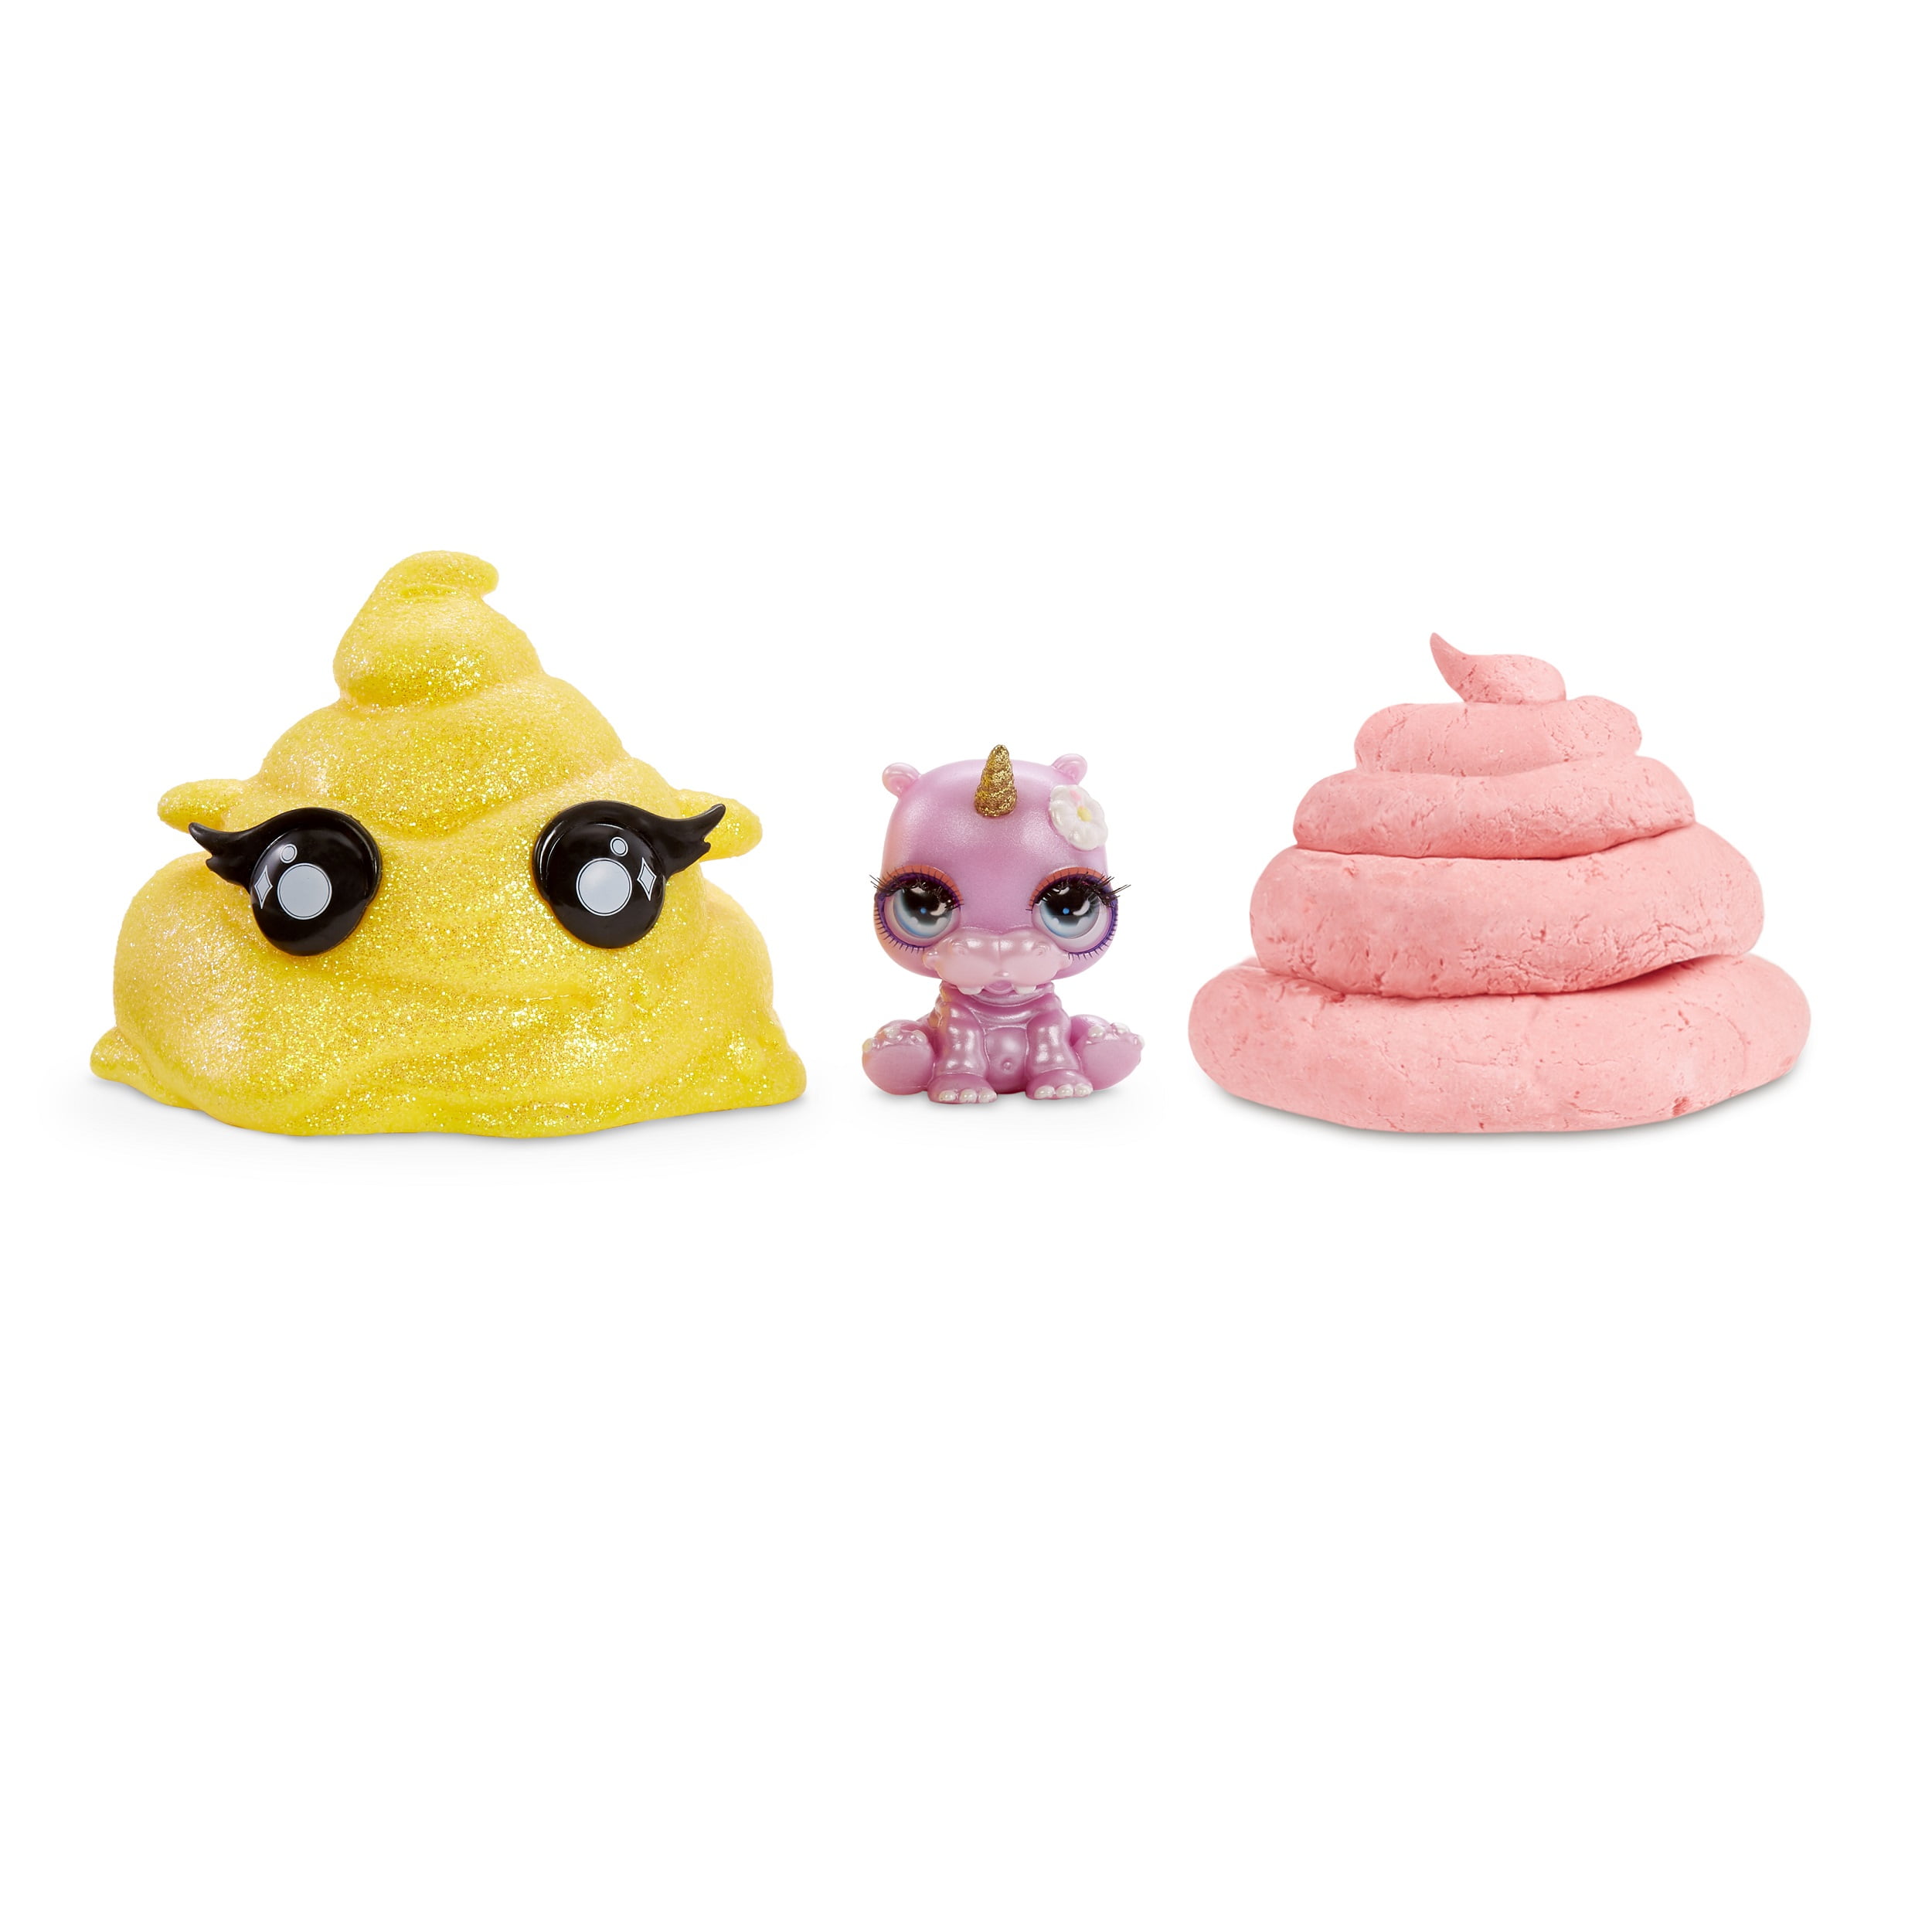 Poopsie Cutie Tooties Surprise Collectible Slime & Mystery Character 2 with  brand new slimes!